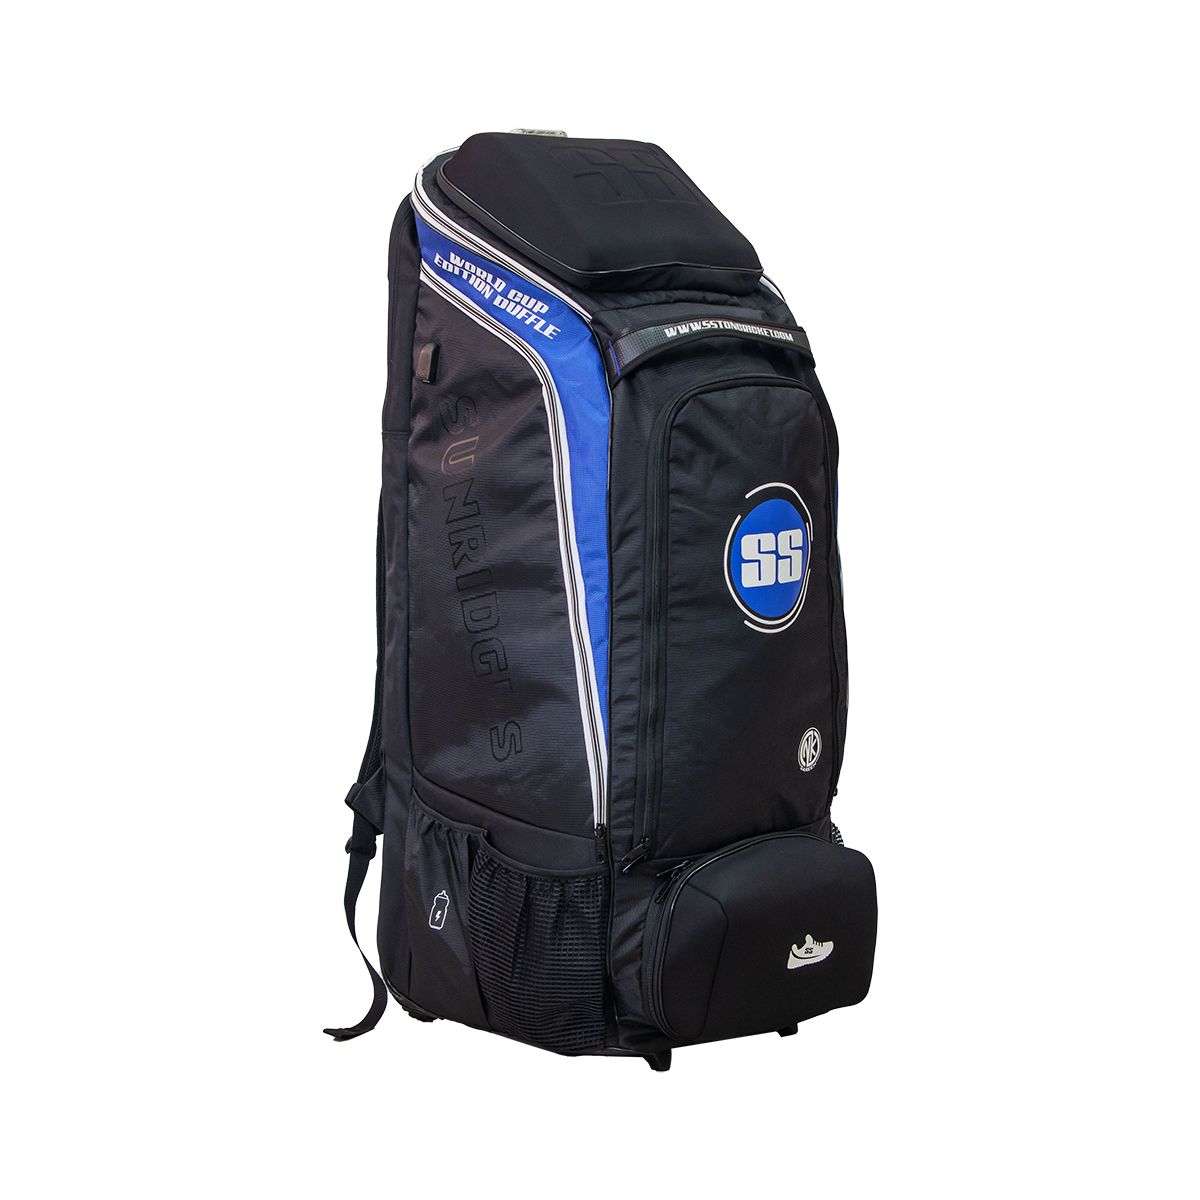 SS WORLD CUP EDITION DUFFLE CRICKET BAG - BLUE